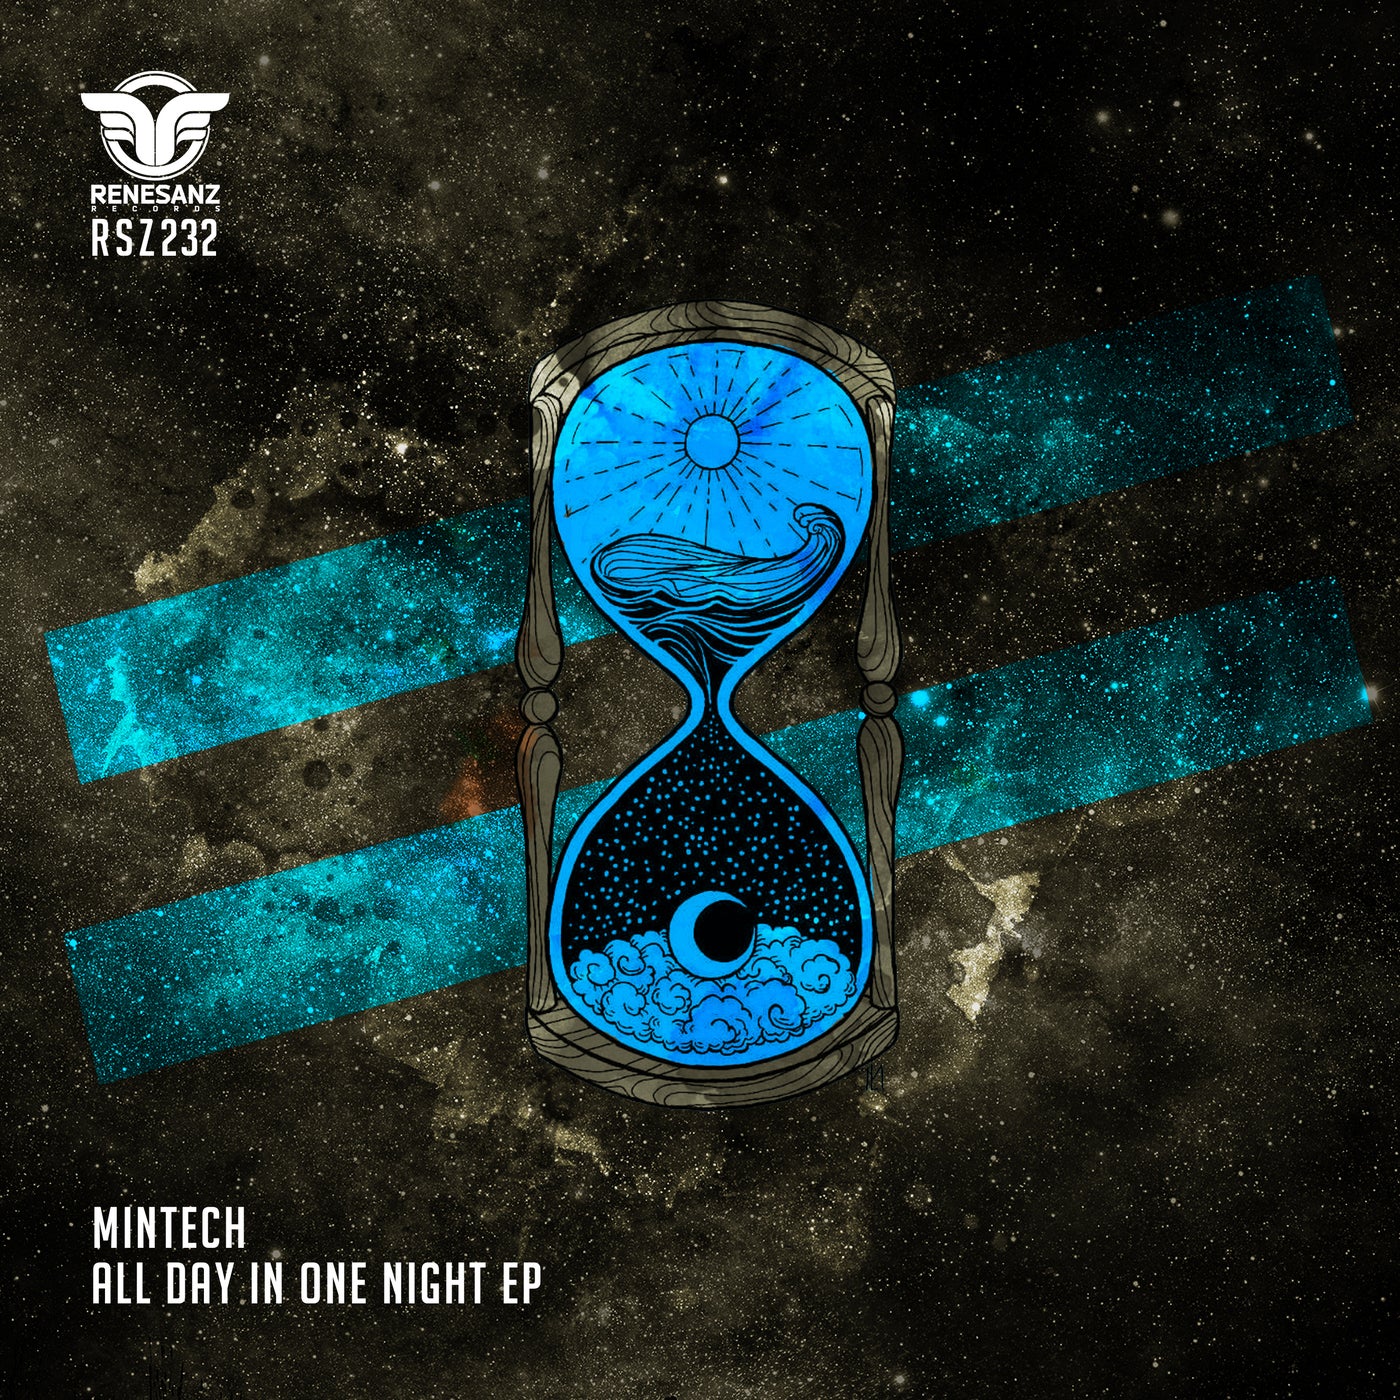 Mintech – All Day In One Night EP [RSZ232]